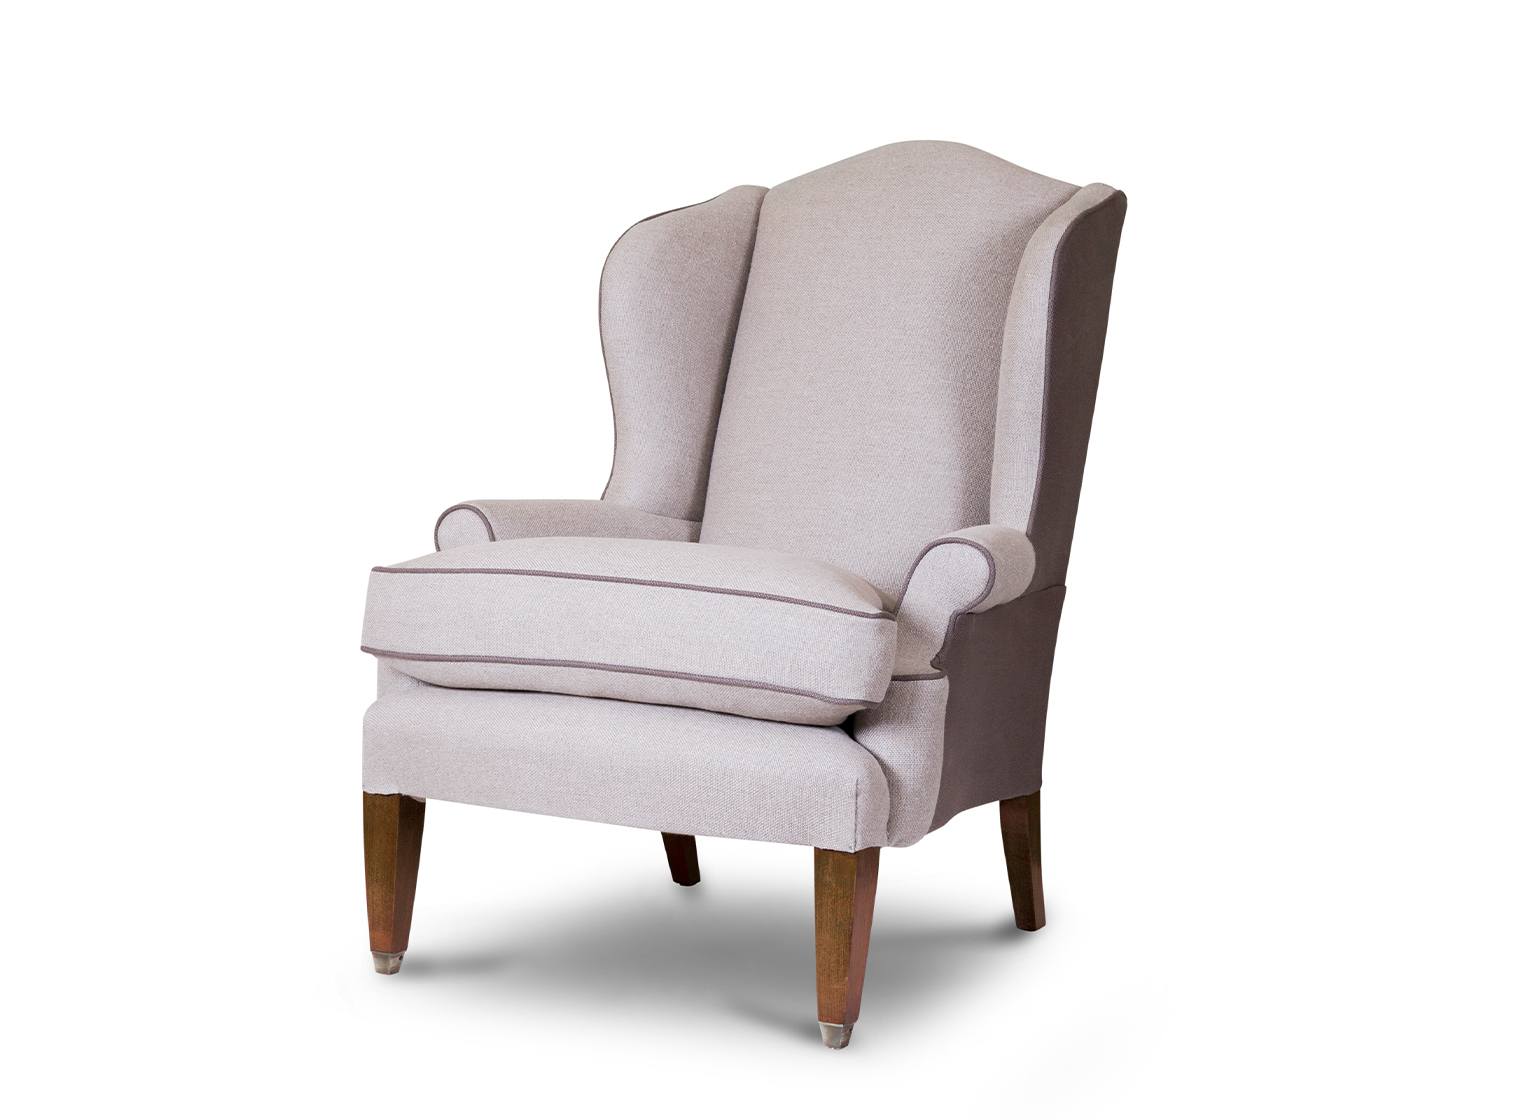 Club Wing Chair in Donegal - Oatmeal - Beaumont & Fletcher